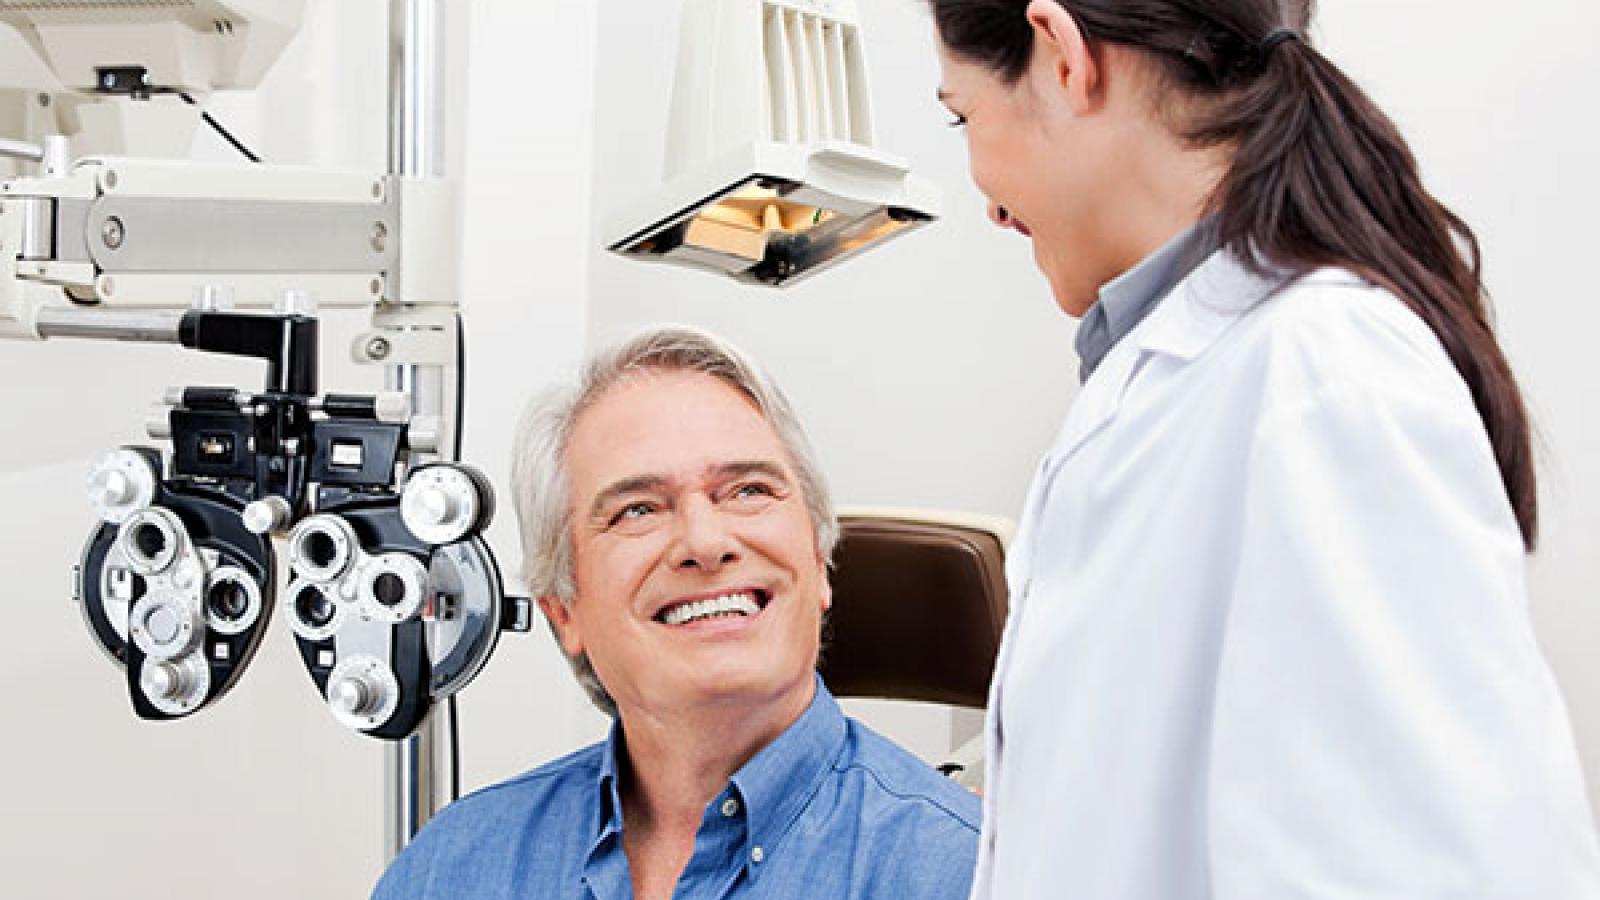 Eye Exams are Important Even If You Don't Wear Glasses